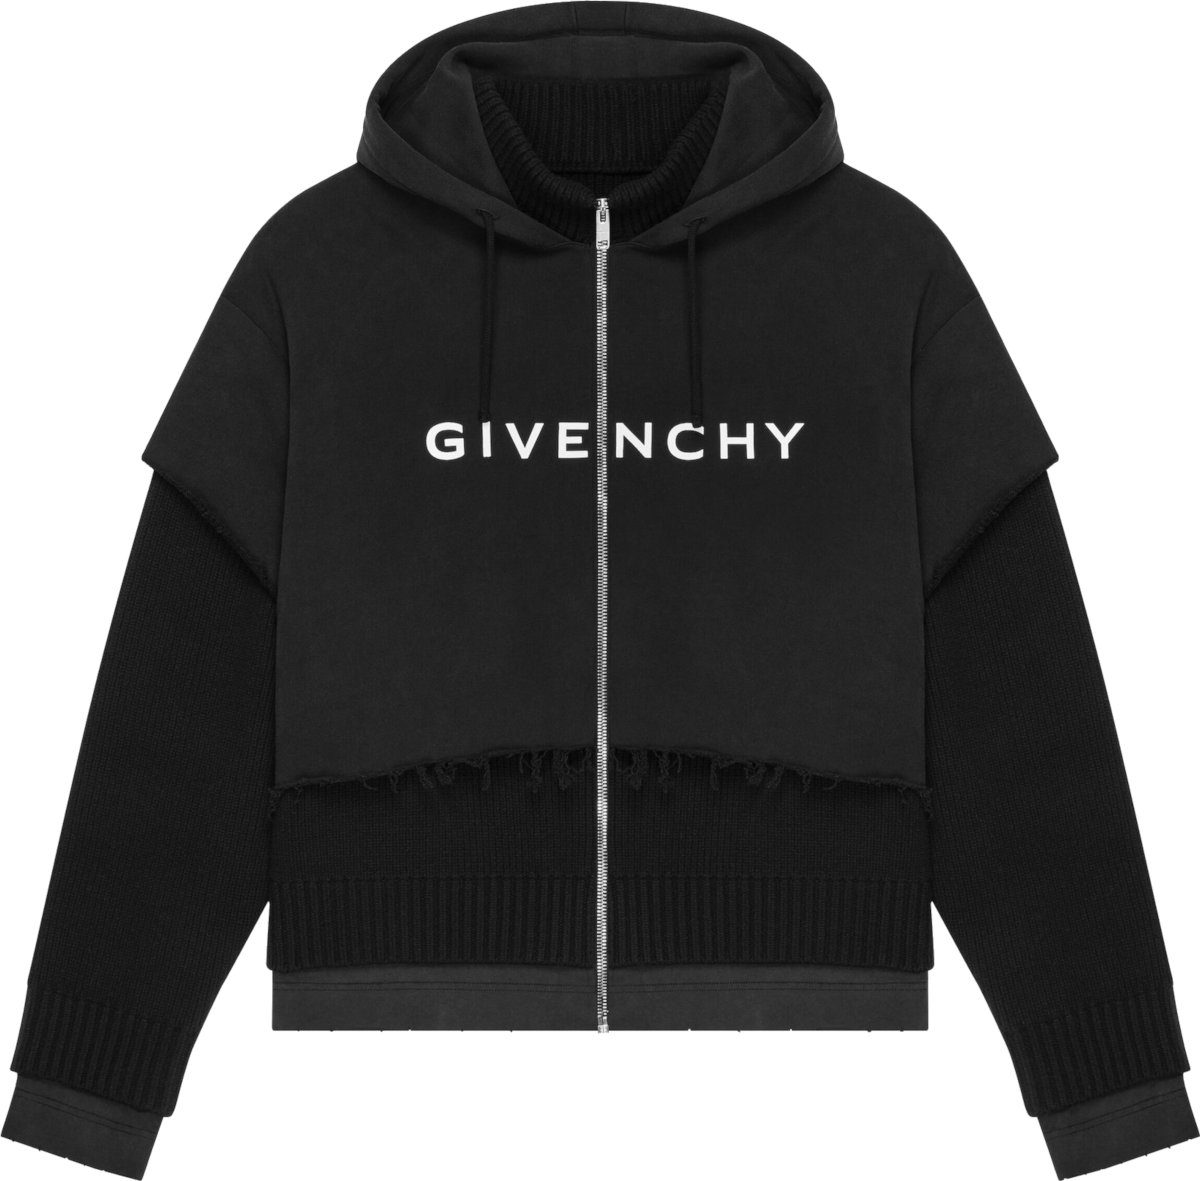 Givenchy Black Layered Sweater Zip Hoodie | INC STYLE